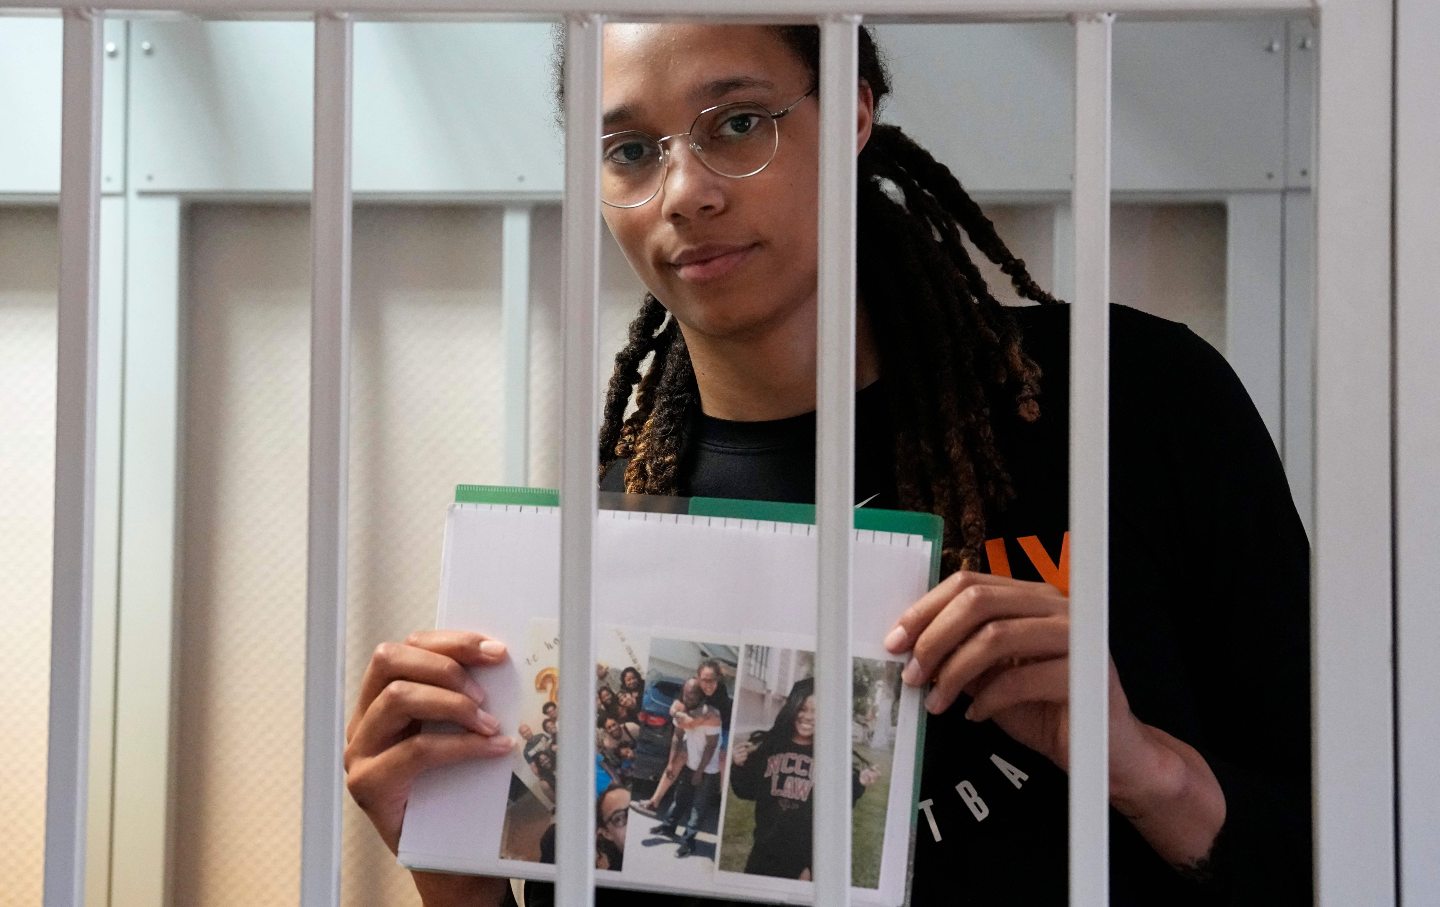 Brittney Griner holds a photo of her family behind bars